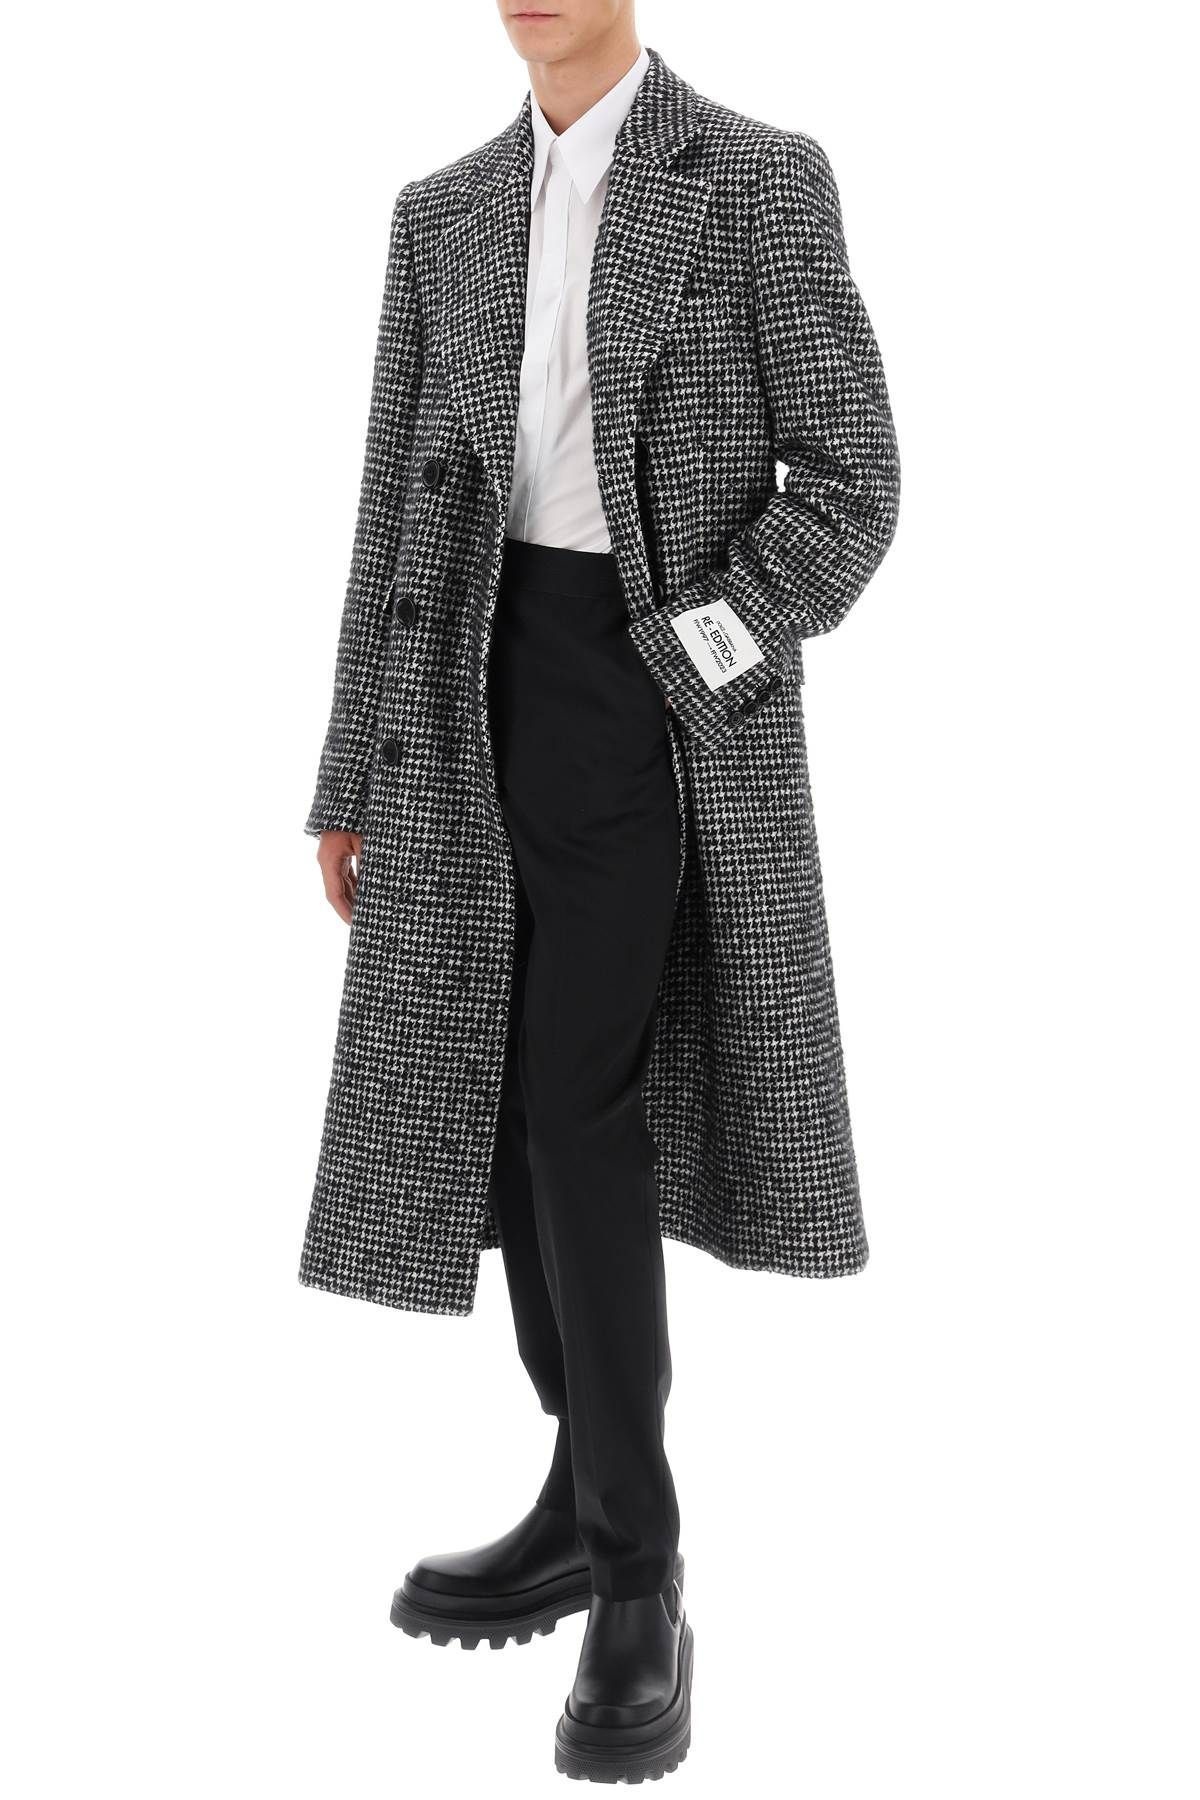 RE-EDITION COAT IN HOUNDSTOOTH WOOL - 2